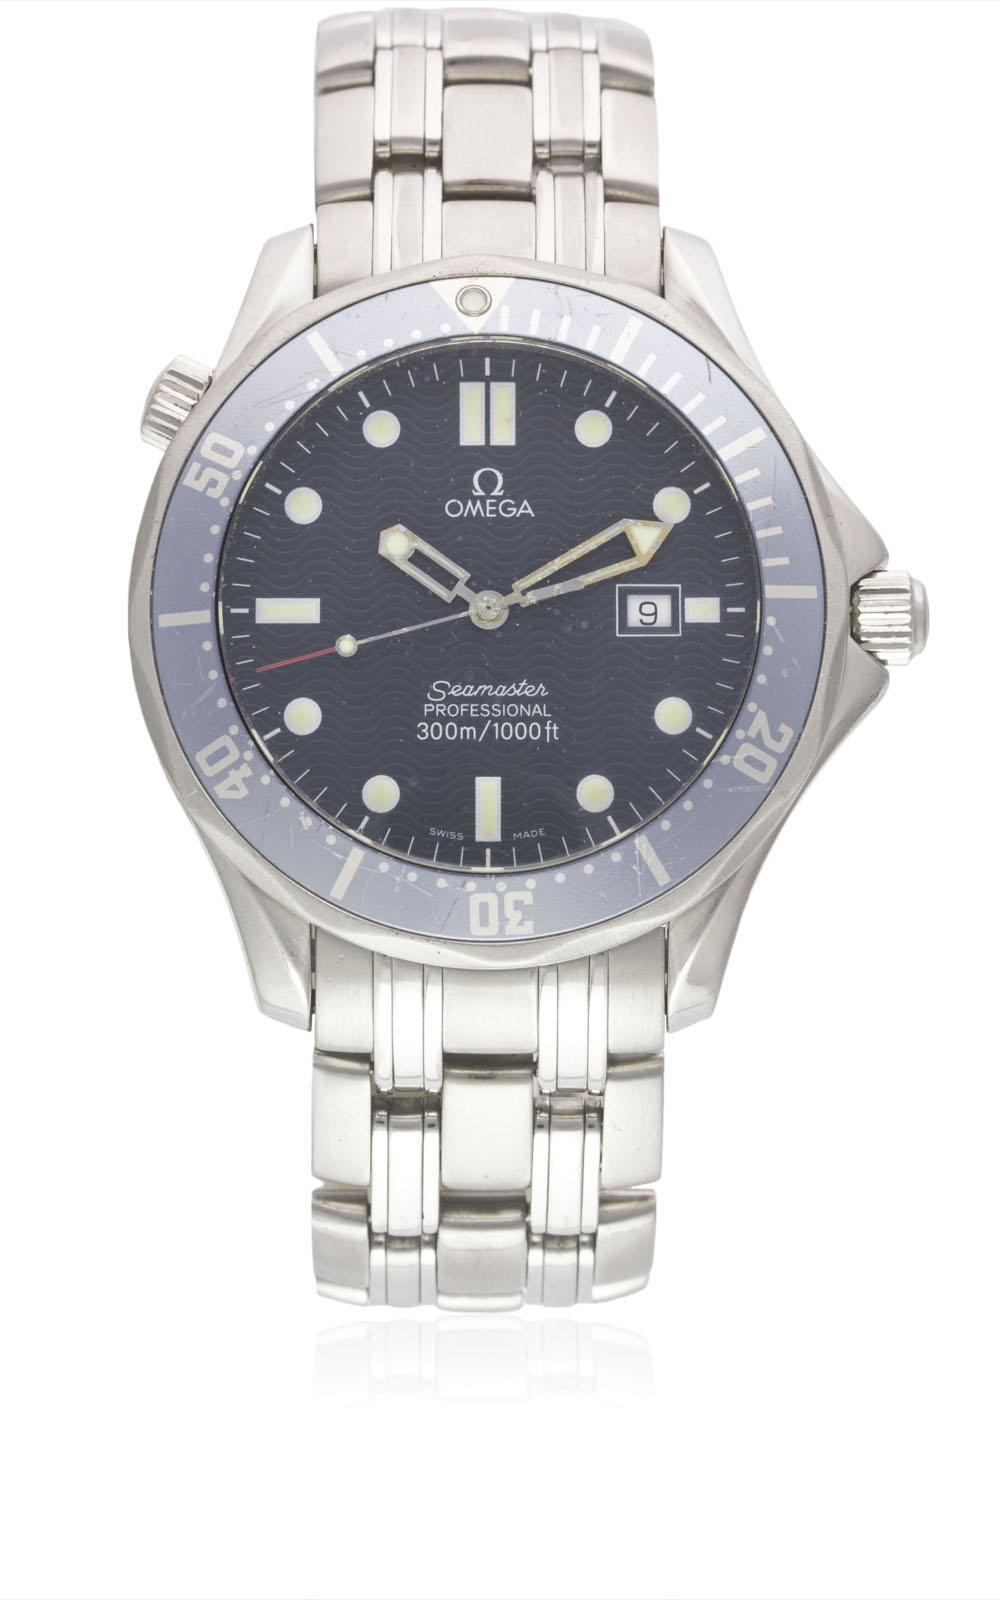 A GENTLEMAN'S LARGE SIZE STAINLESS STEEL OMEGA SEAMASTER PROFESSIONAL 300M BRACELET WATCH CIRCA 1999